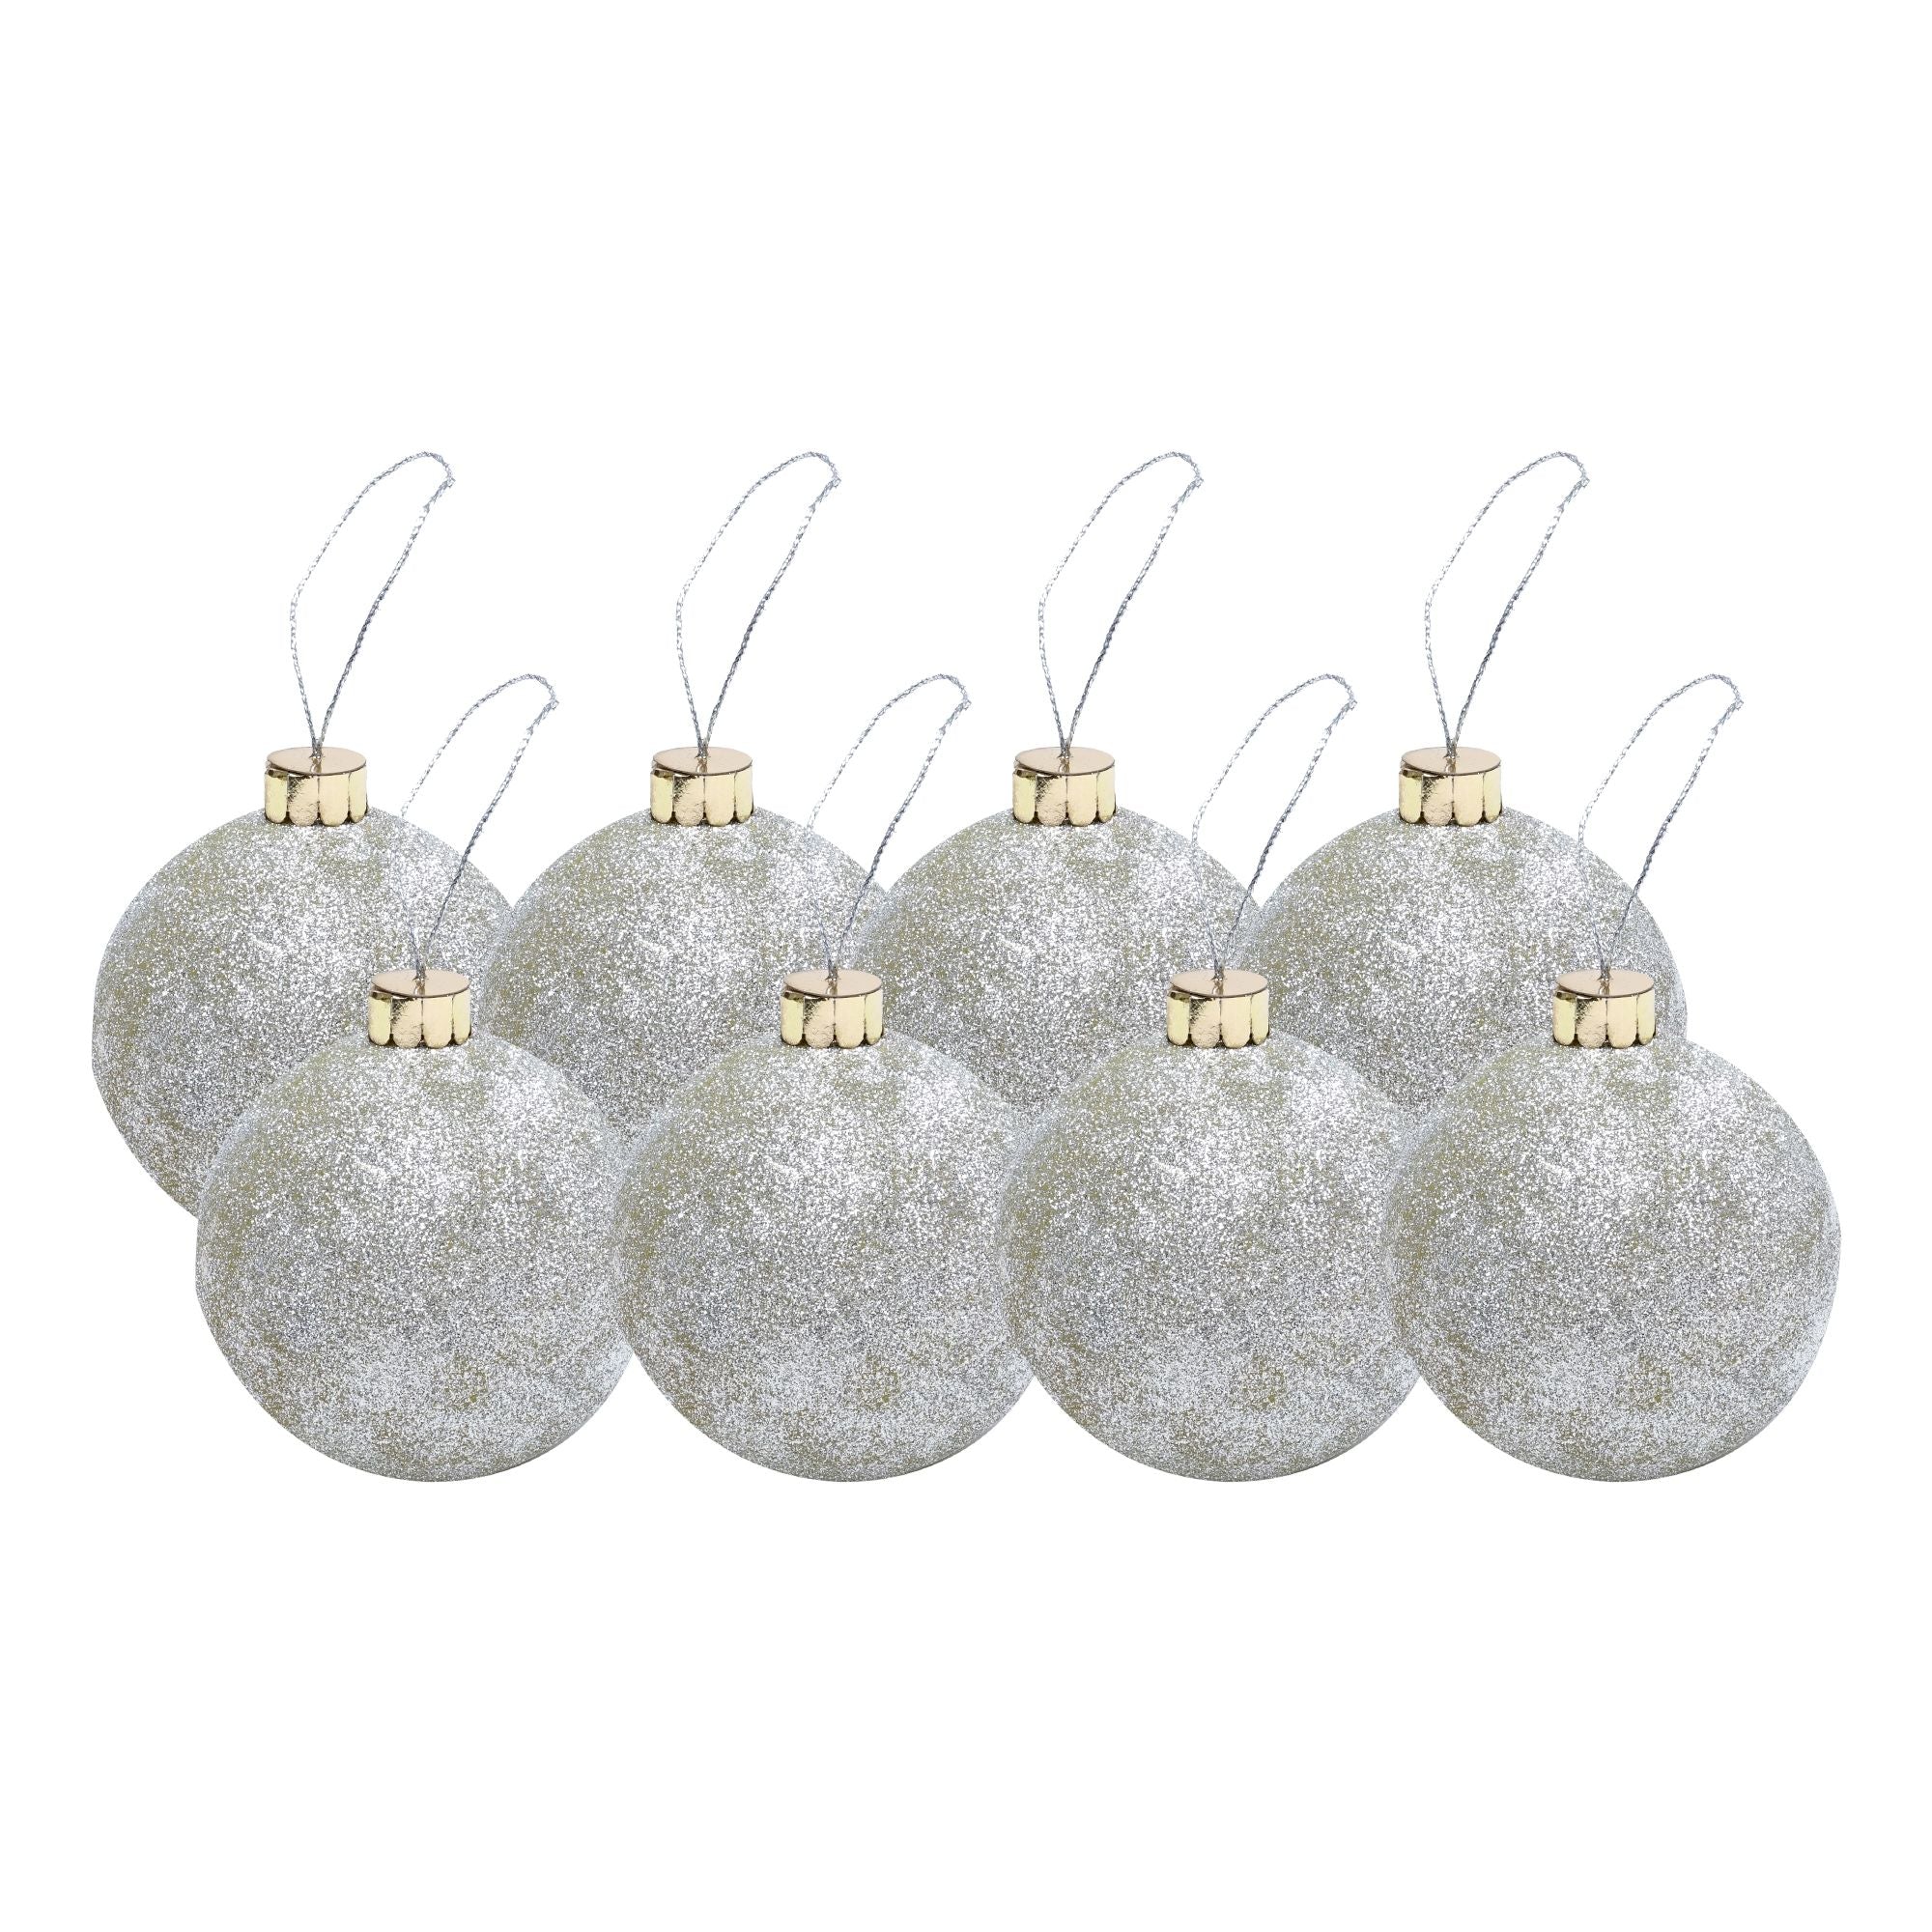 Handmade Christmas Ornaments - Glitter Baubles, 50mm, Silver, 8pc